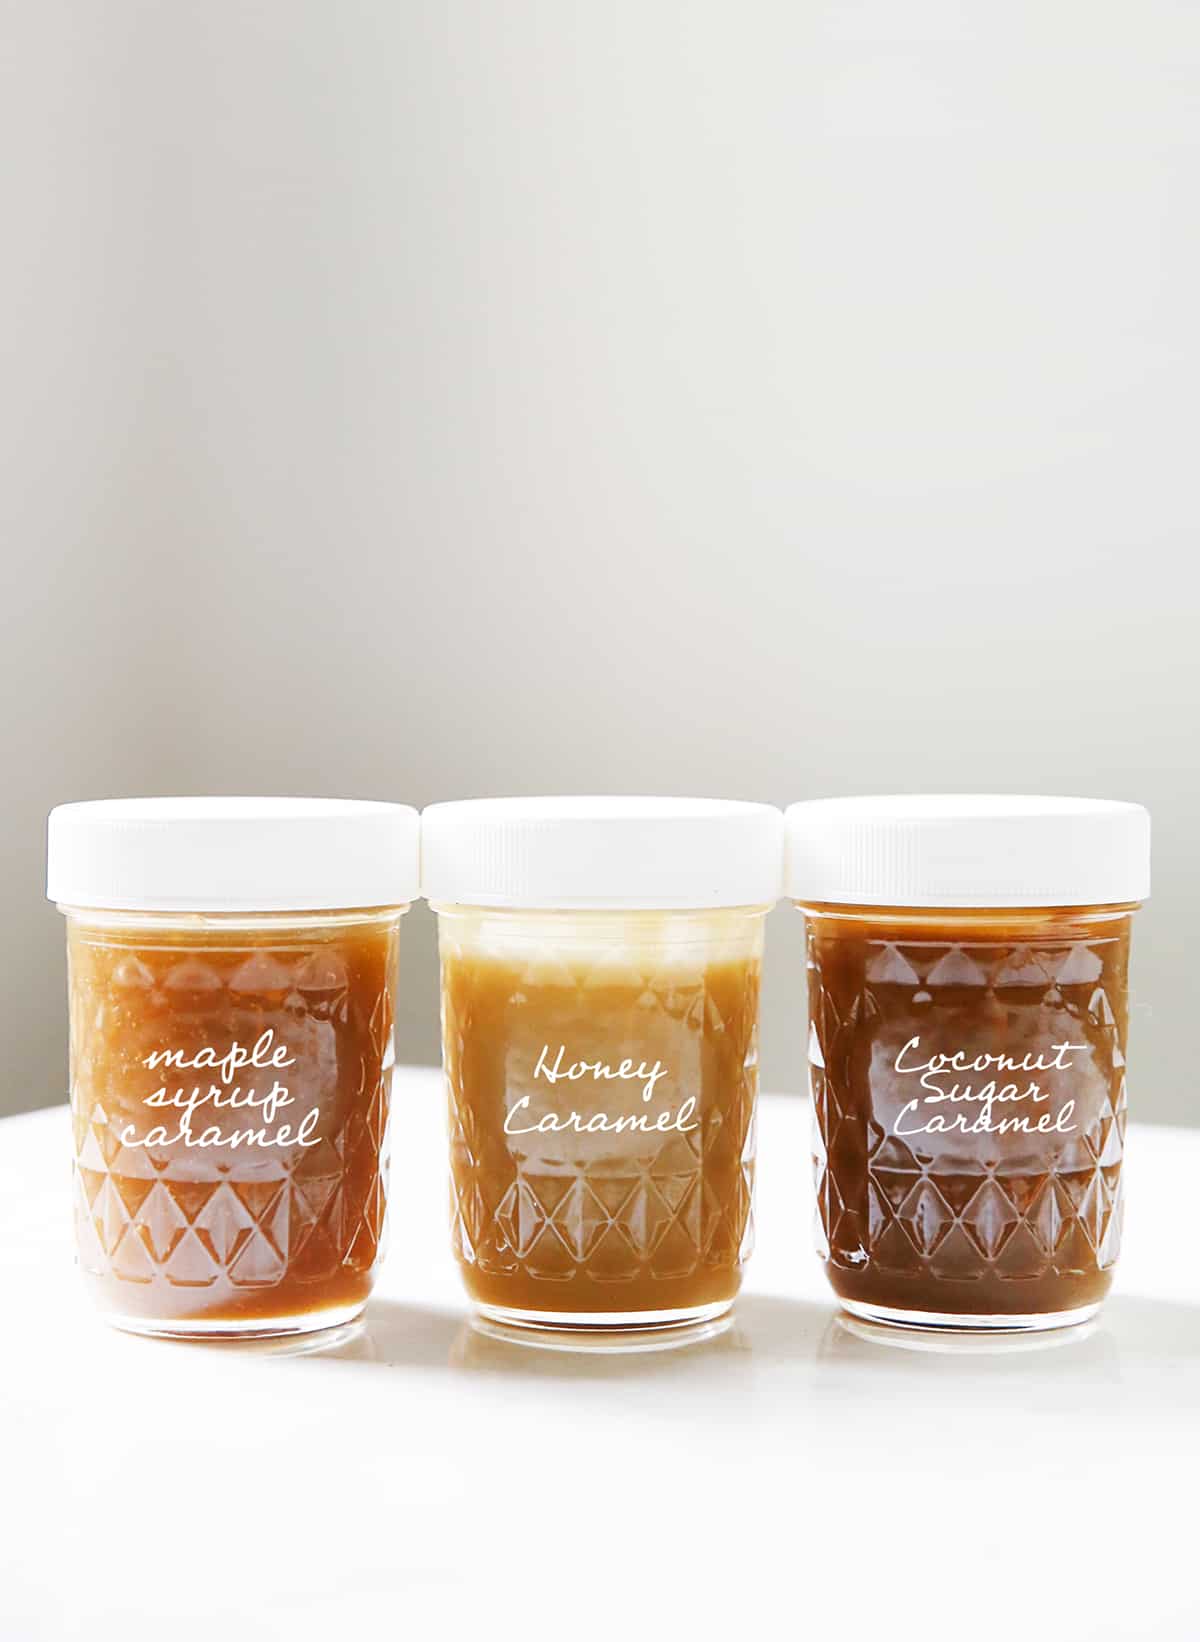 Three jars of homemade caramel stand in a row.